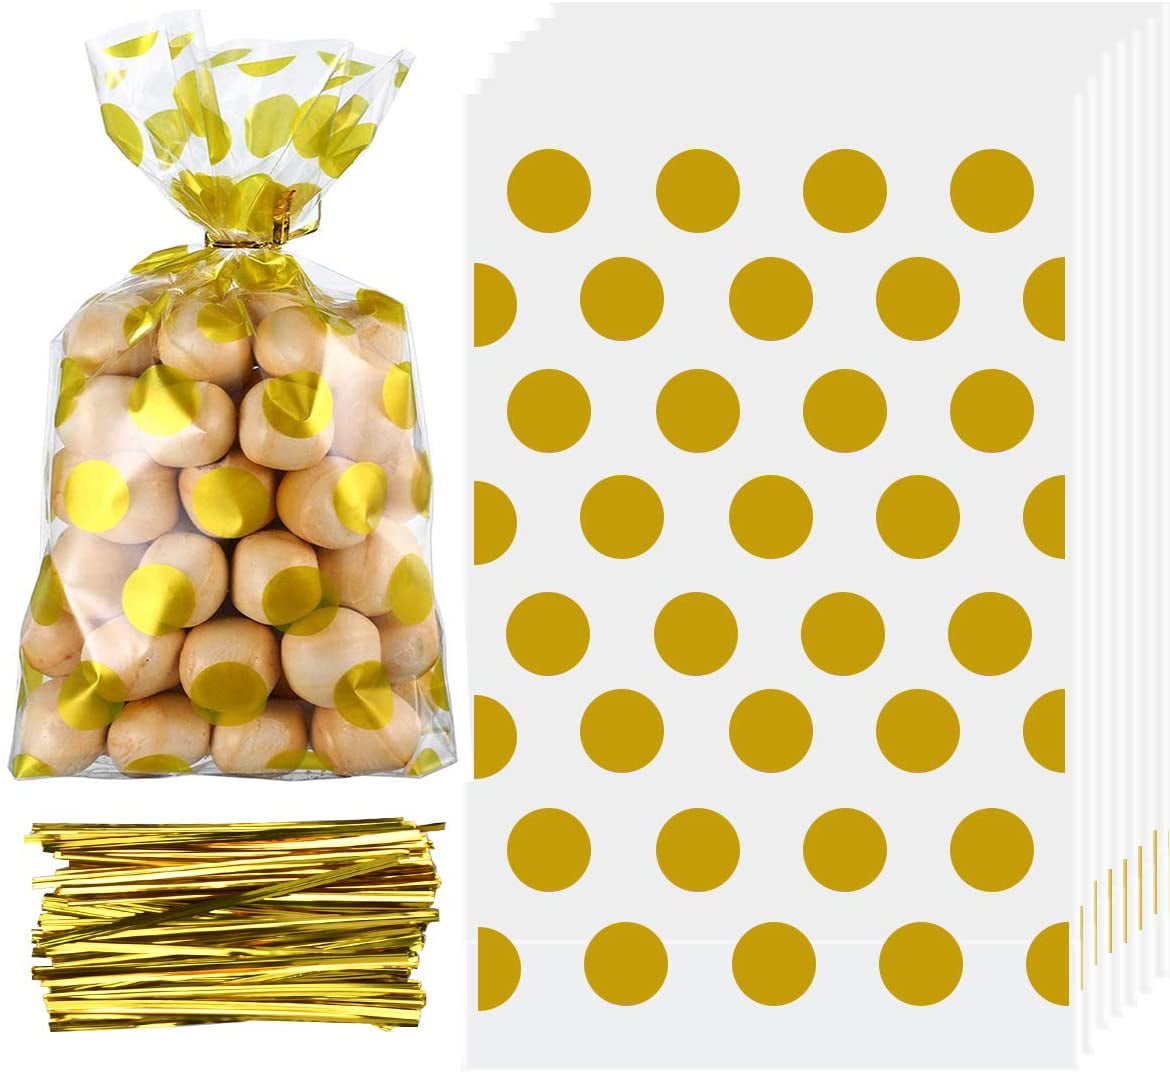 Gold Polka Dots Sweet Bags Polka Dot Treat Bags 100 PCS Gusset Bags with Gold Twist Ties 5.2 x 8.4 INCH Cellophane Goody Bags with Bottom for Party Favor Candies and Cookies